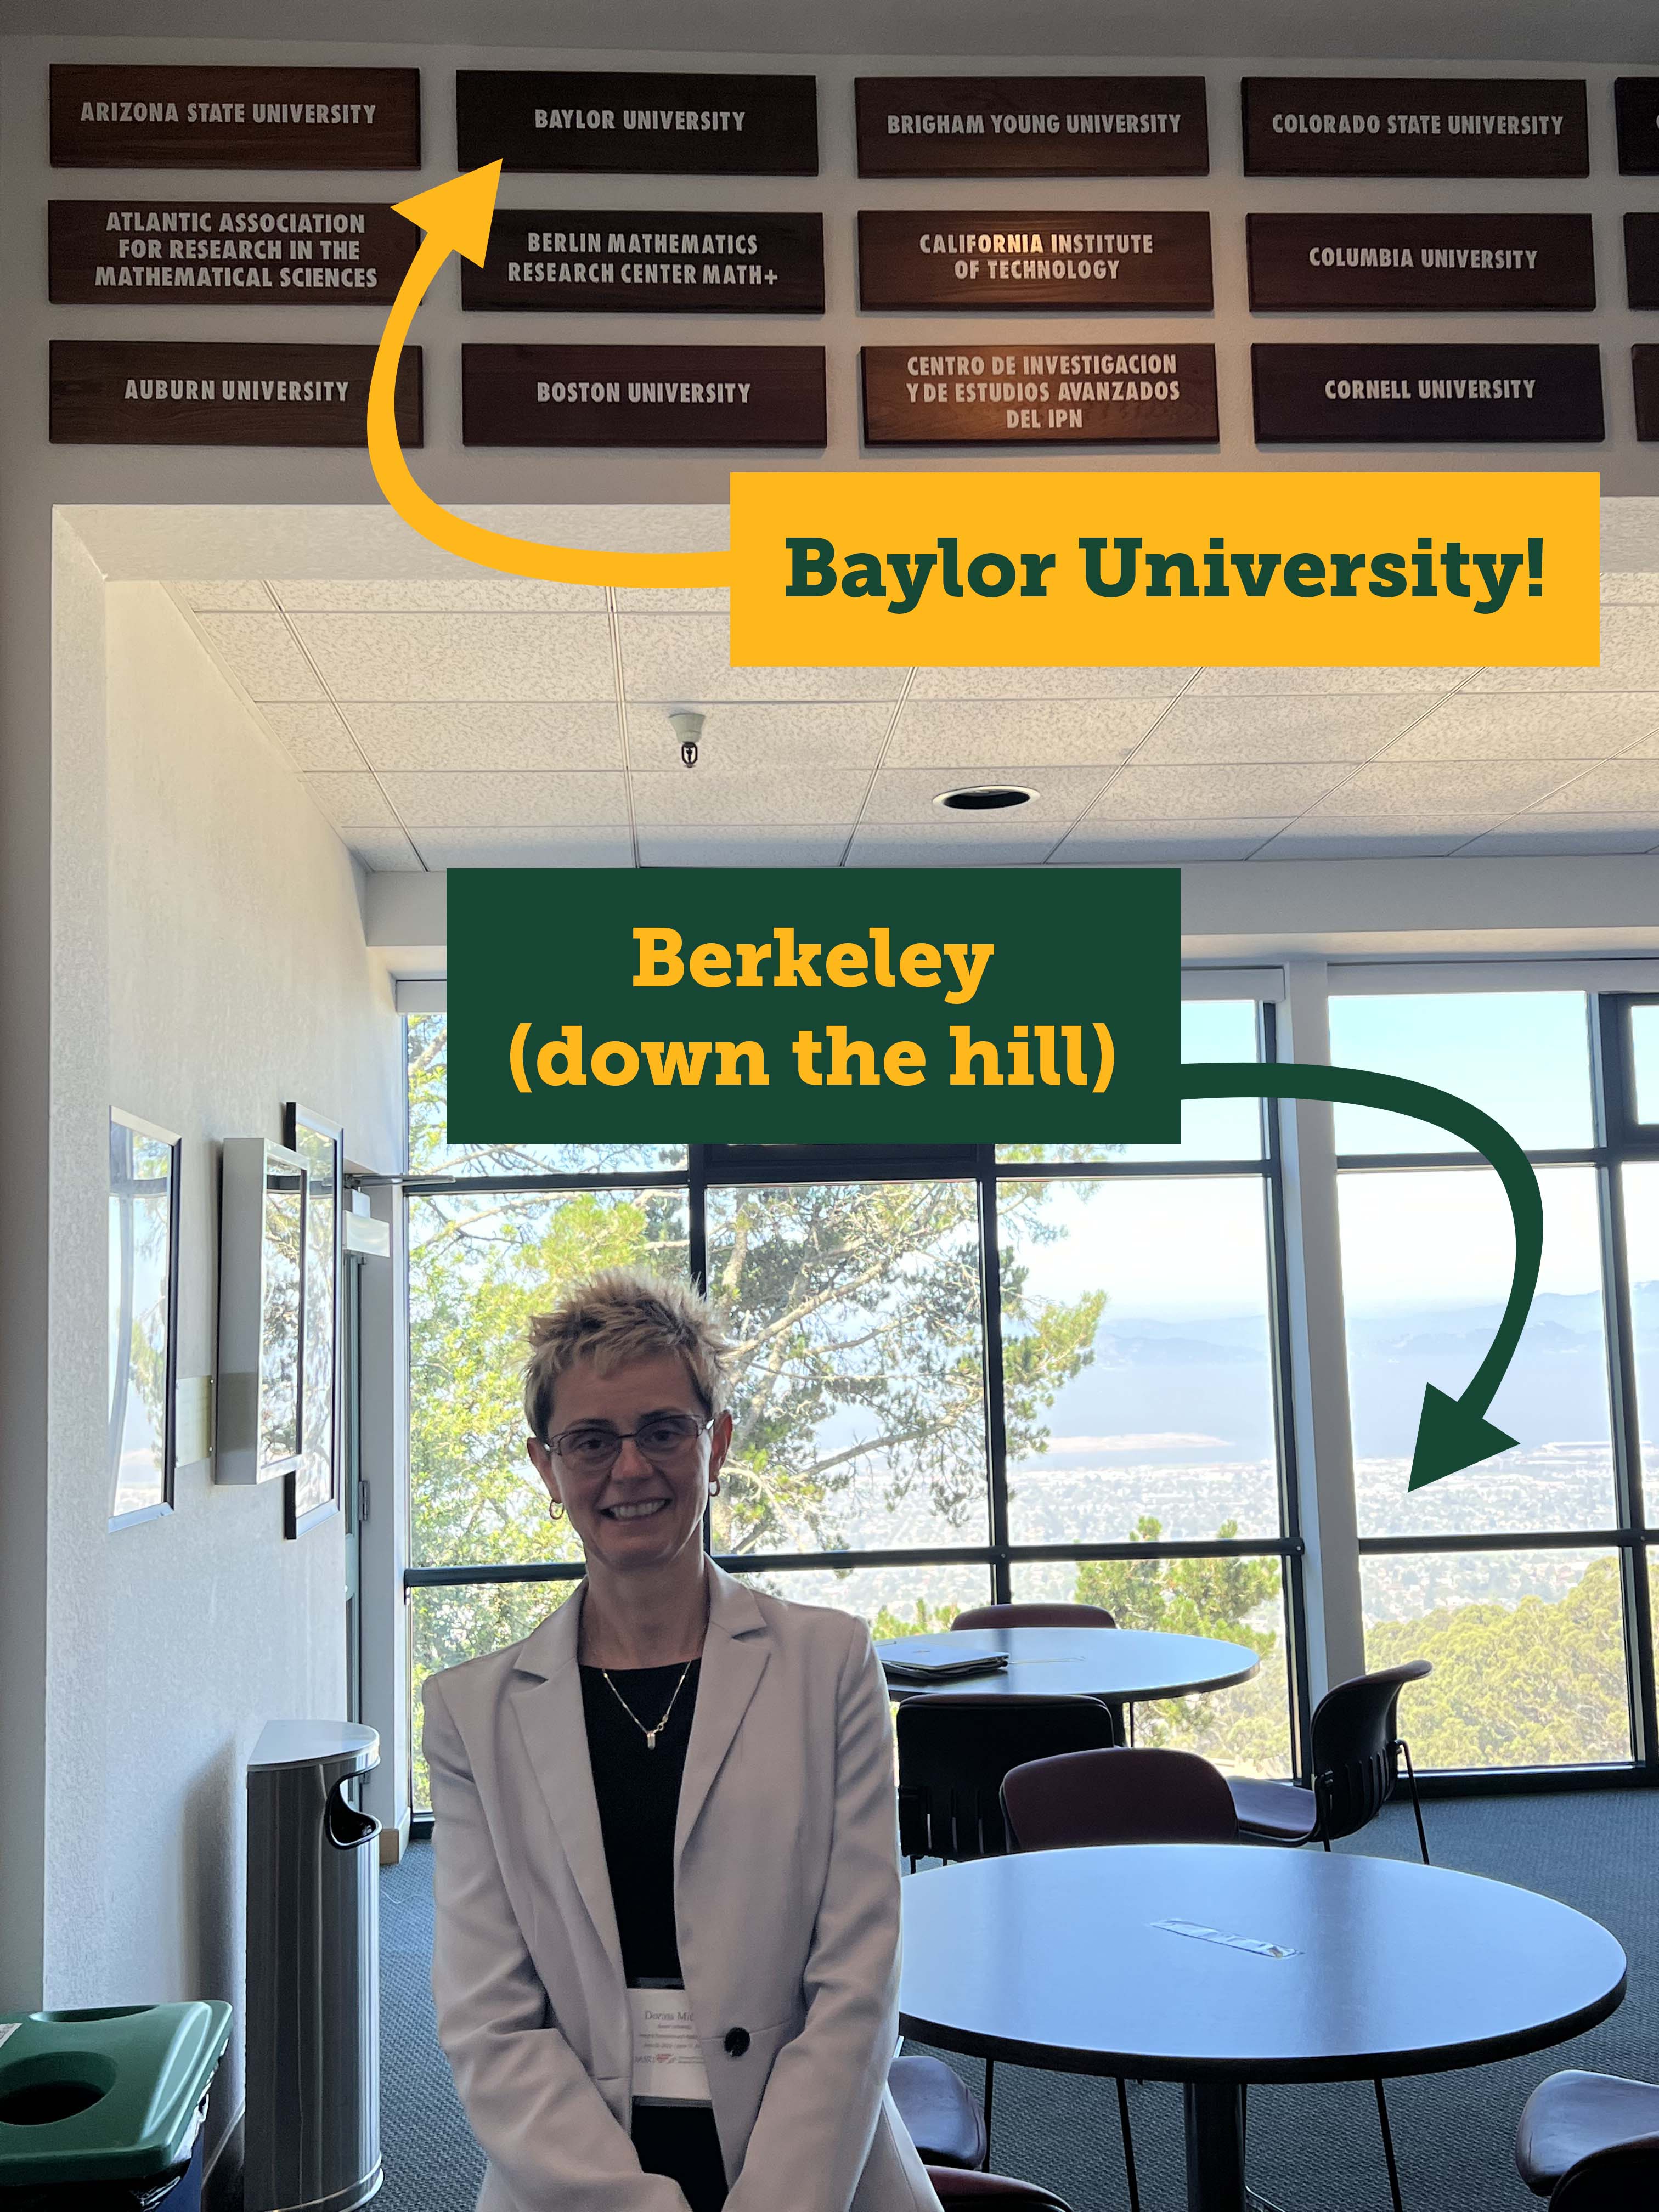 Dr. Dorina Mitrea stands at MSRI below a plaque with Baylor University written on it. Out the window we see a view that looks out over Berkeley and down to the San Francisco Bay.